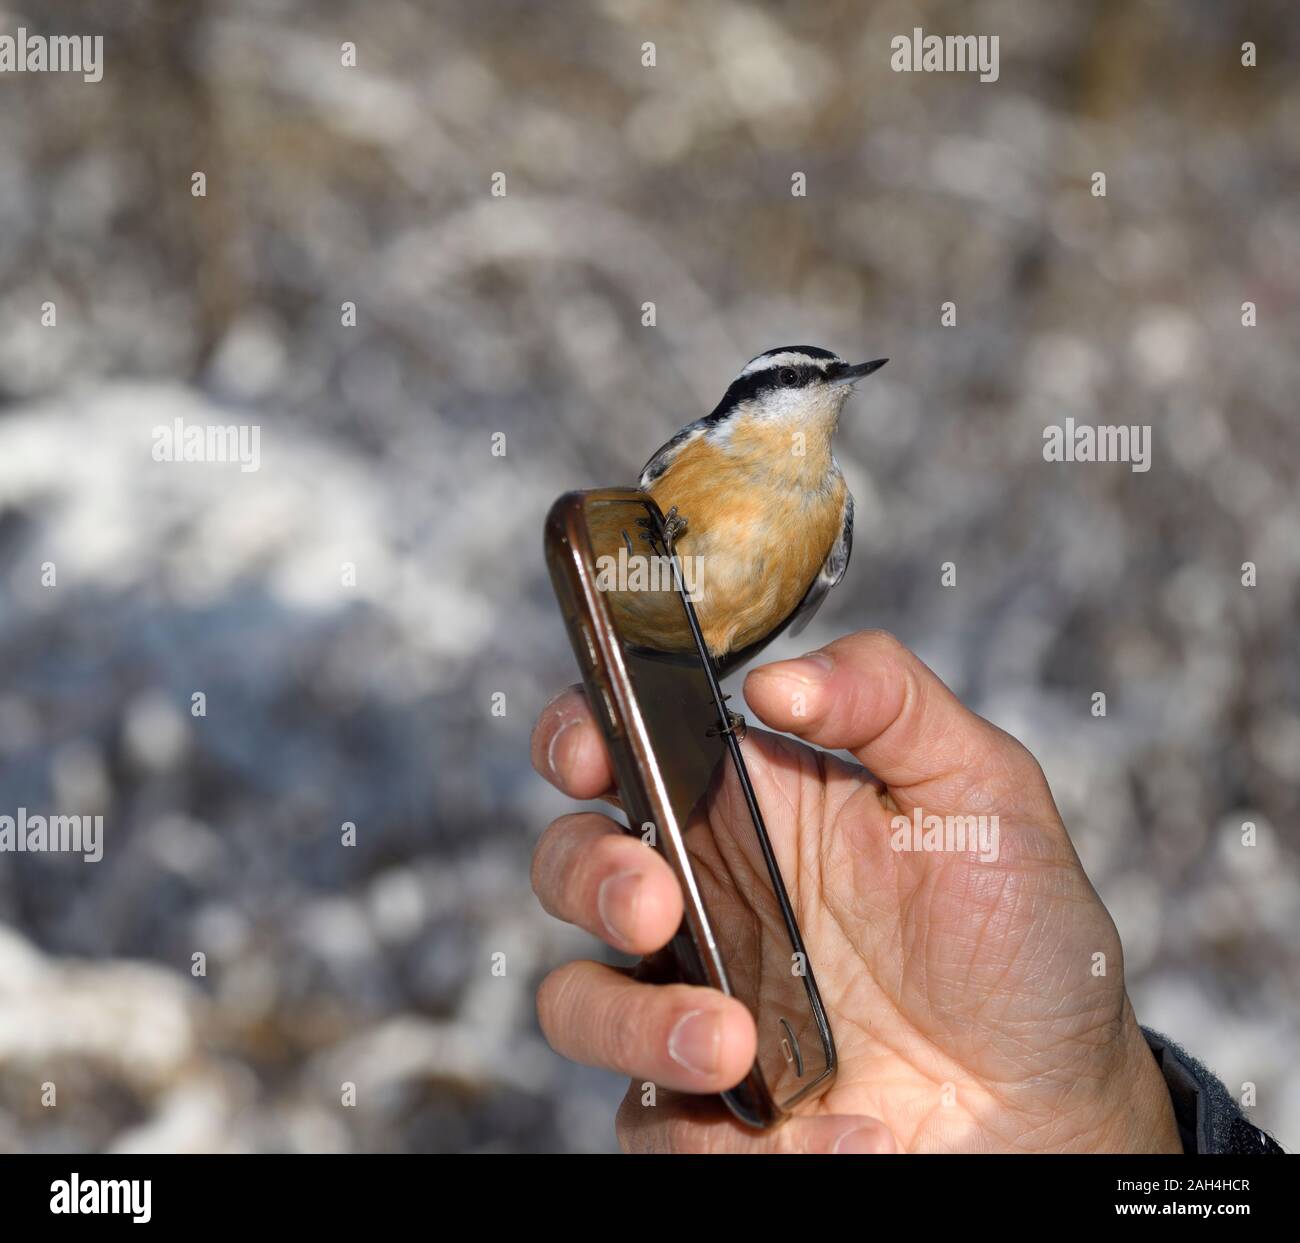 Wild Red Breasted Nuthatch clinging to a cellphone playing bird calls in man's hand in a Toronto park in winter Stock Photo